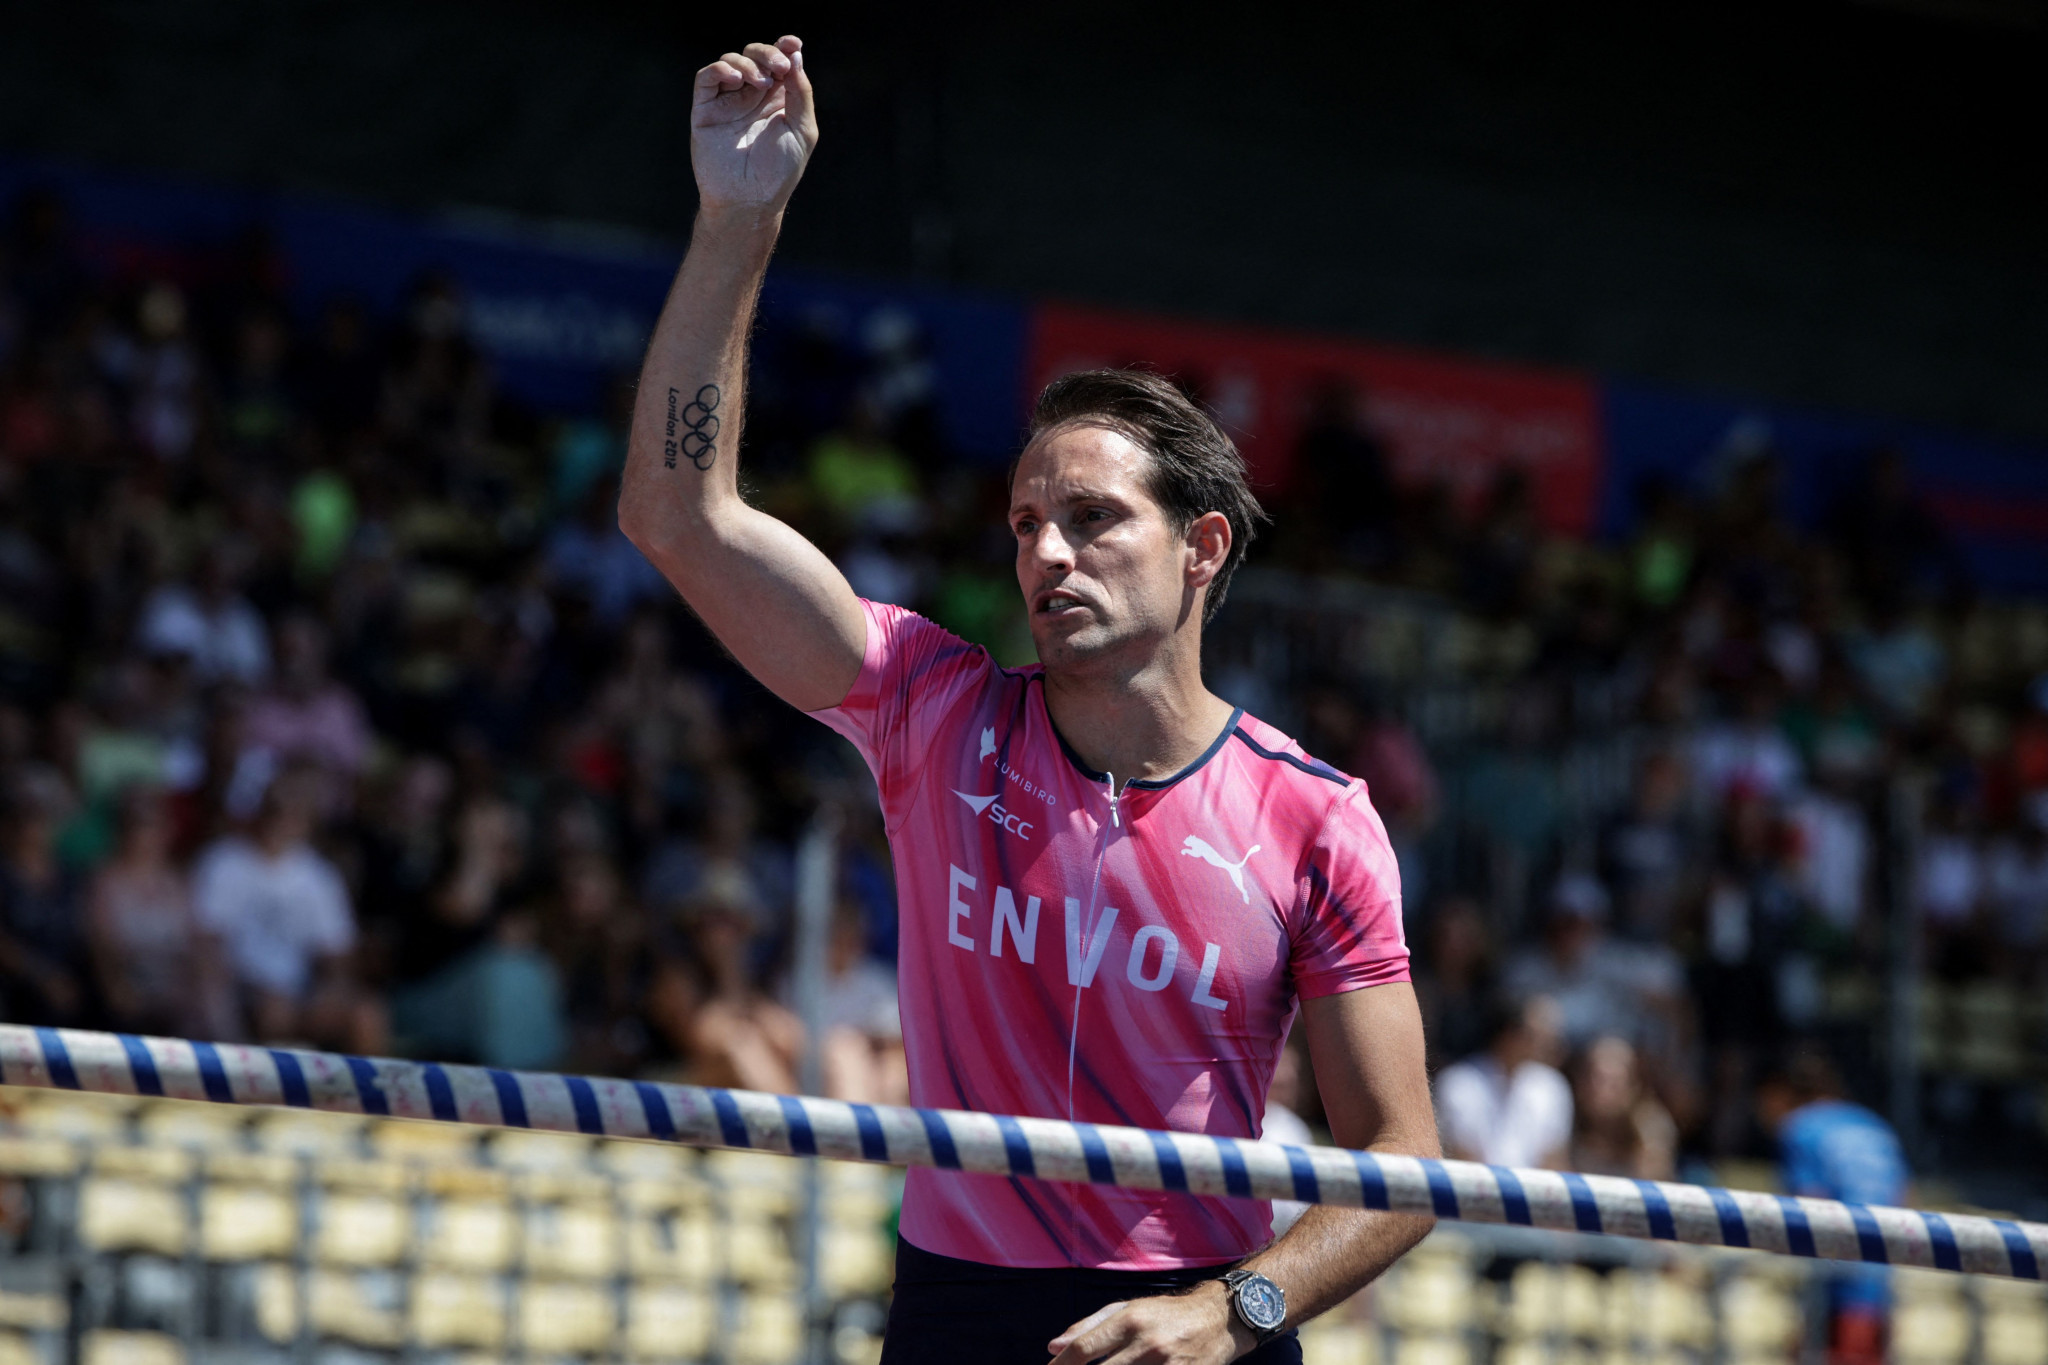 Chair Lavillenie among three re-elected to World Athletics Athletes' Commission and joined by new members